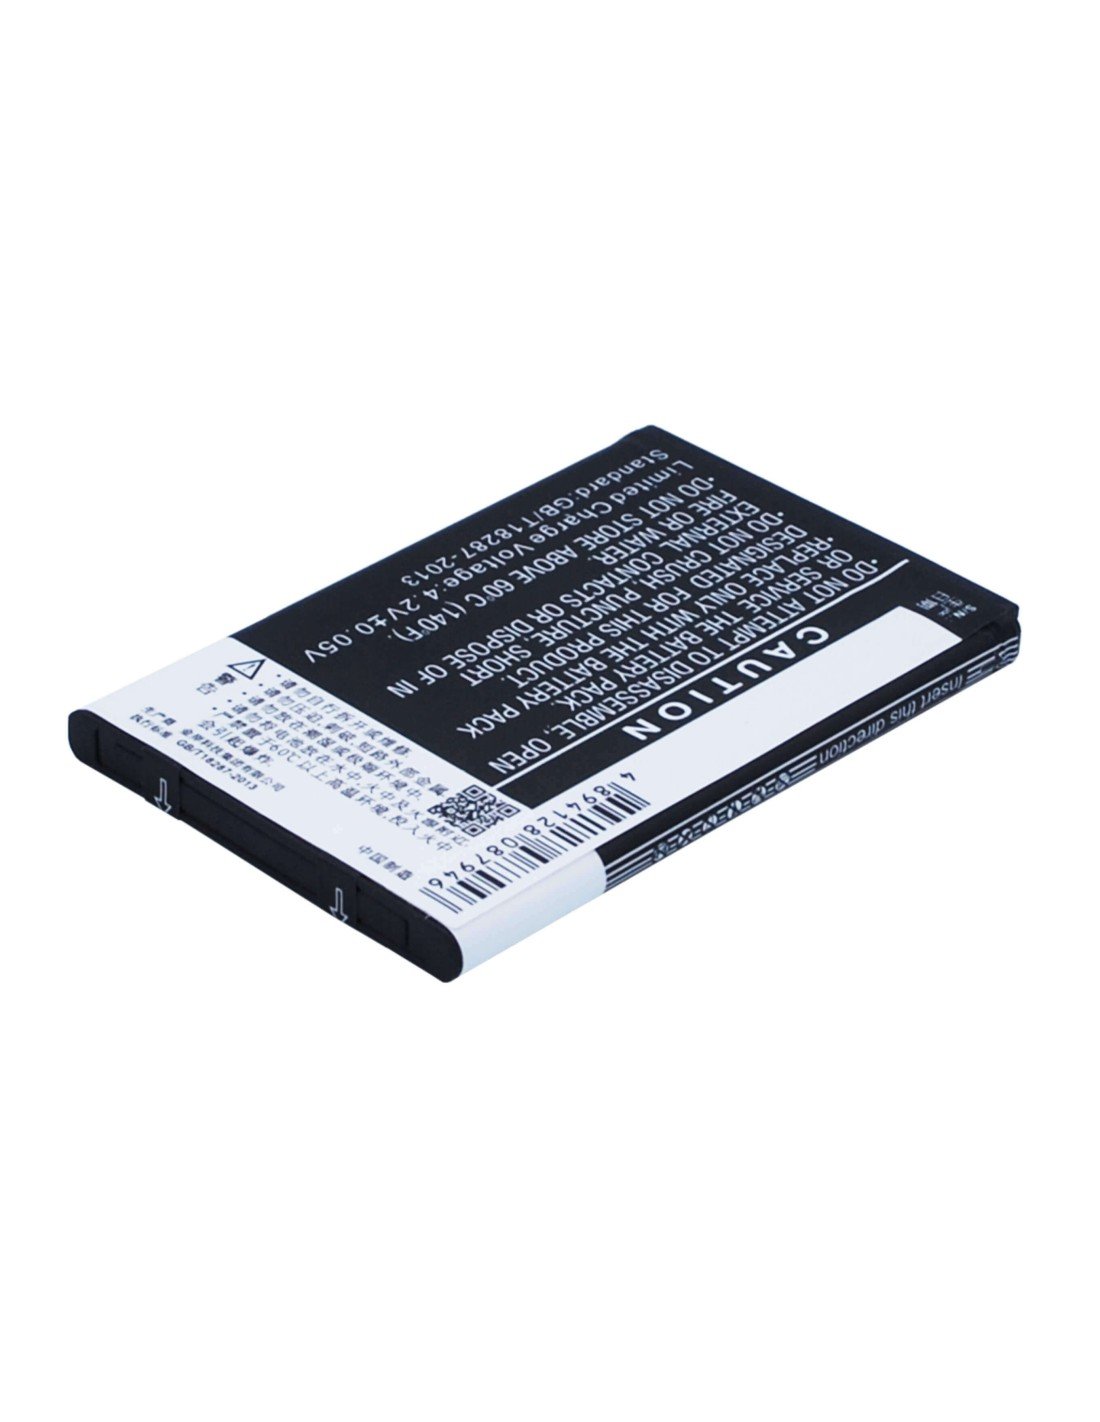 Battery for Coolpad 8809 3.7V, 1650mAh - 6.11Wh